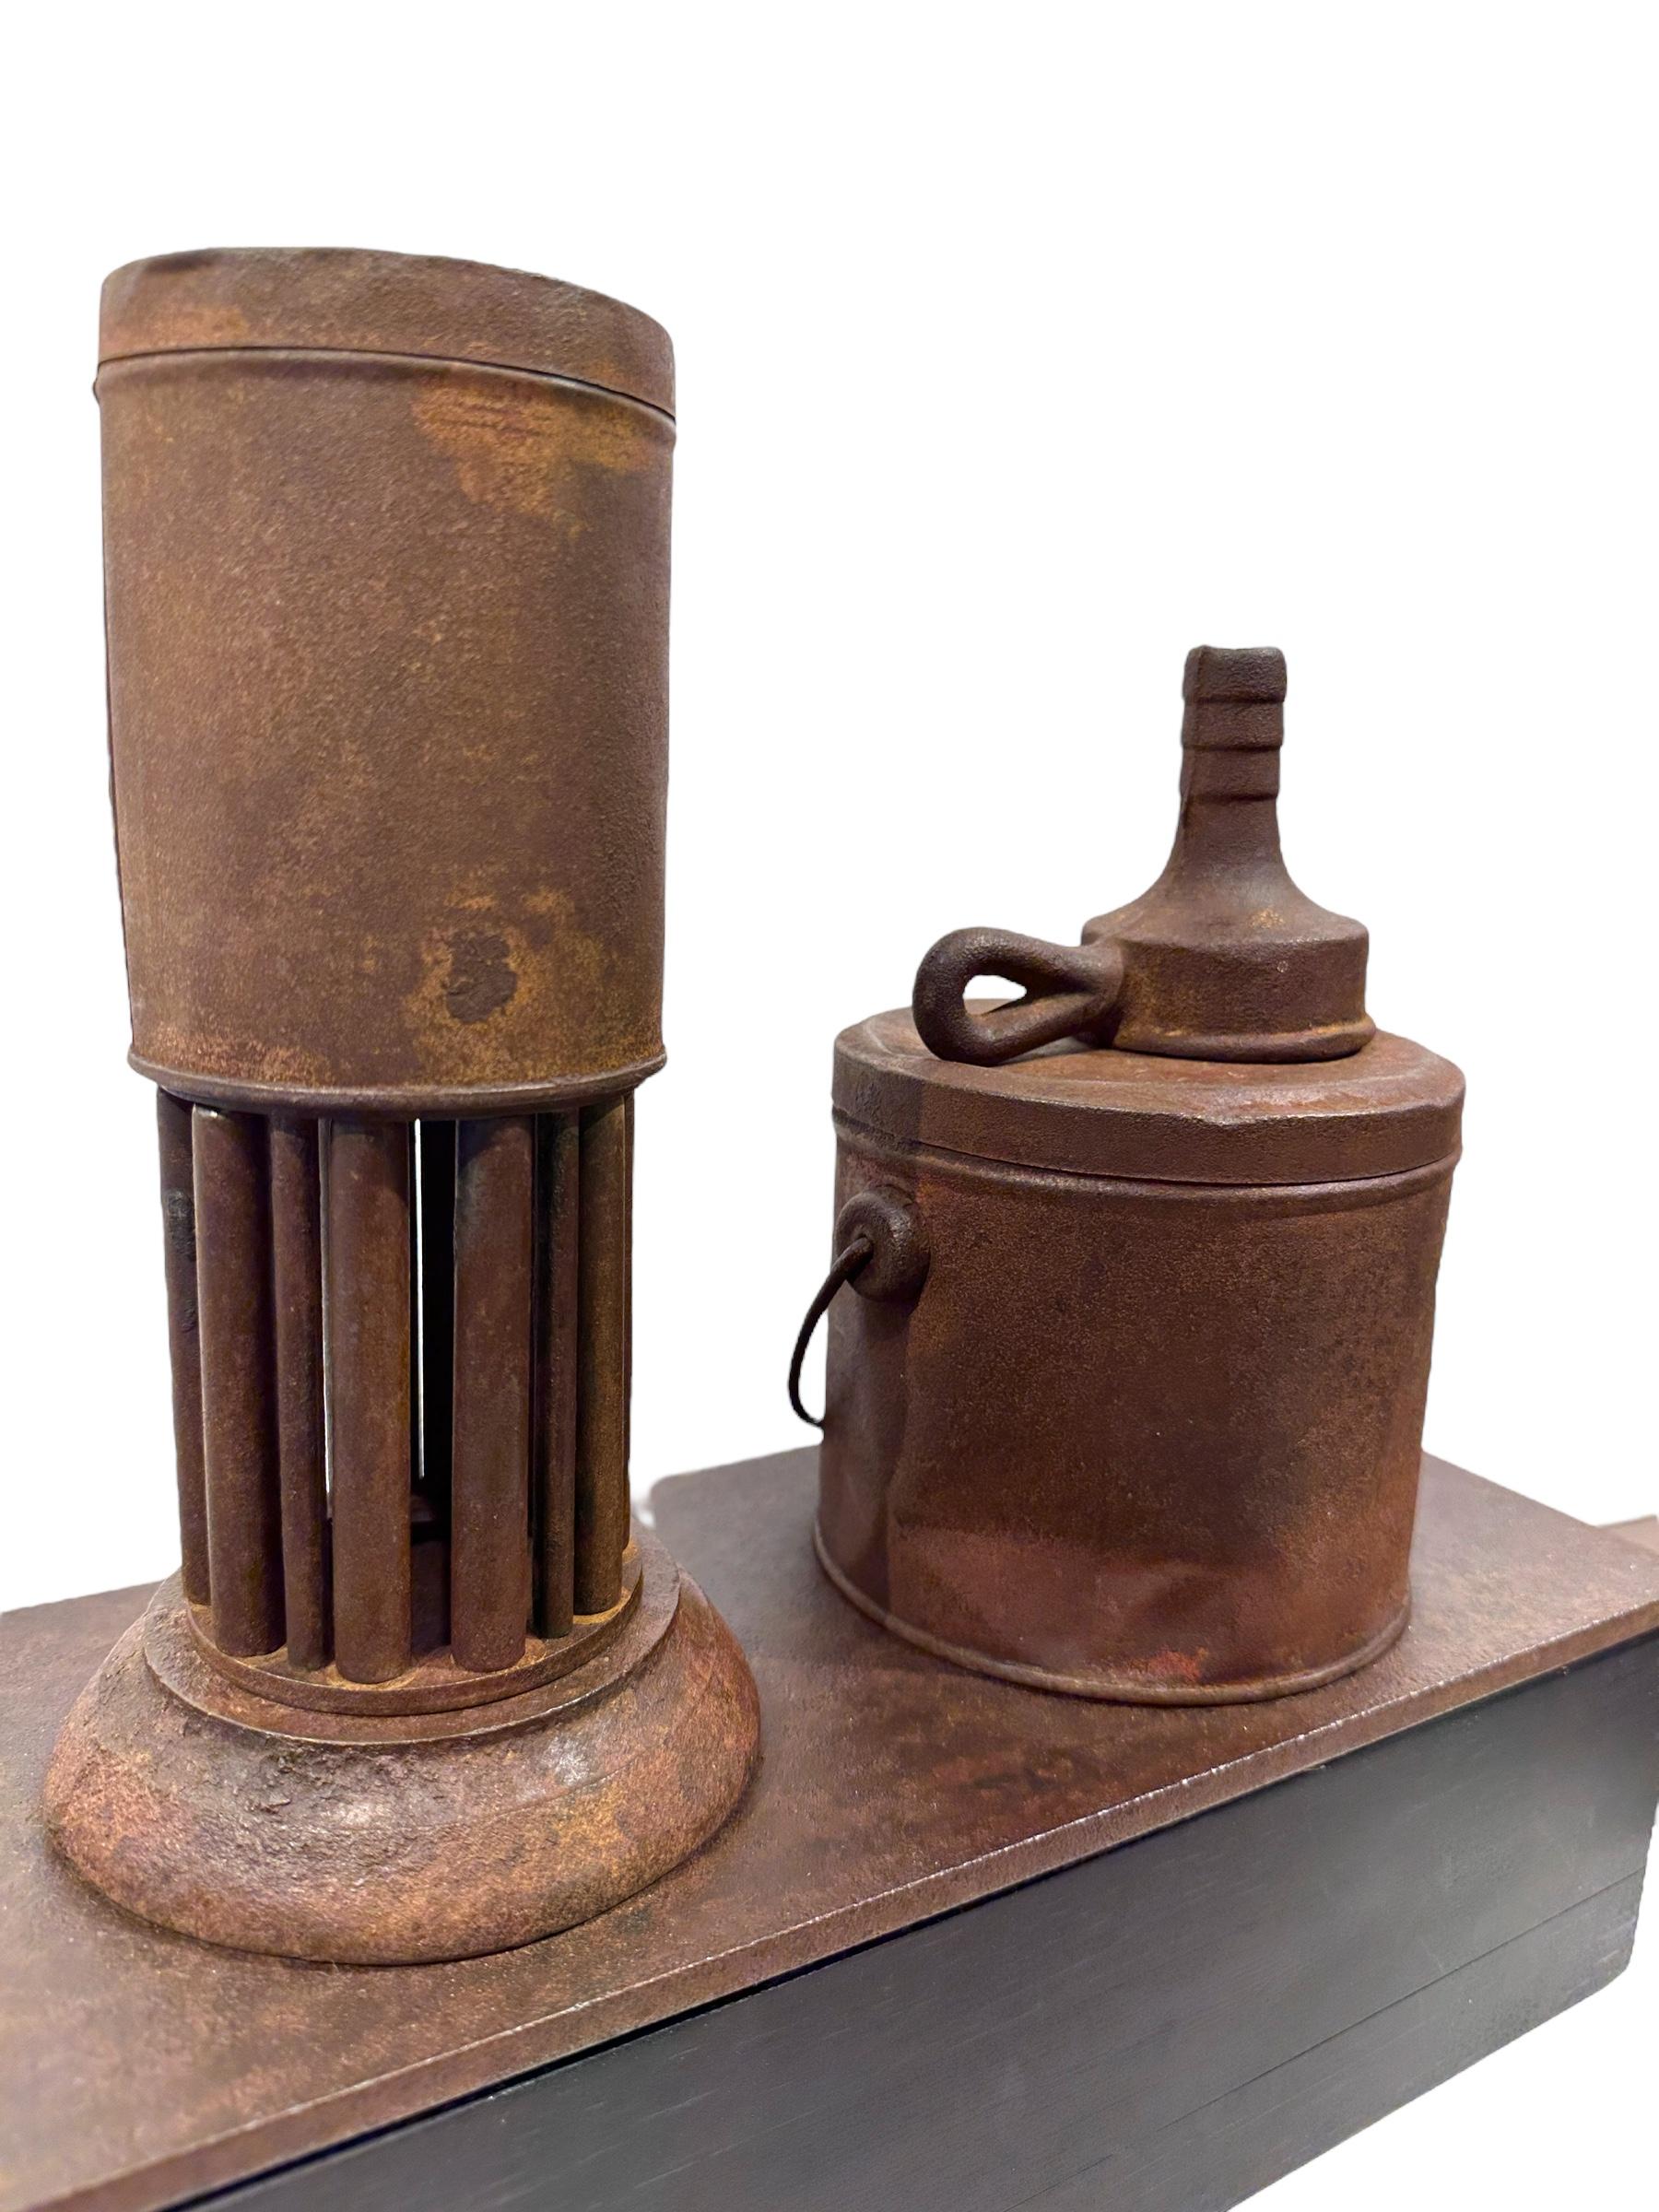 Contemporary Found and Salvaged Industrial Objects, Metal Sculpture on Base For Sale